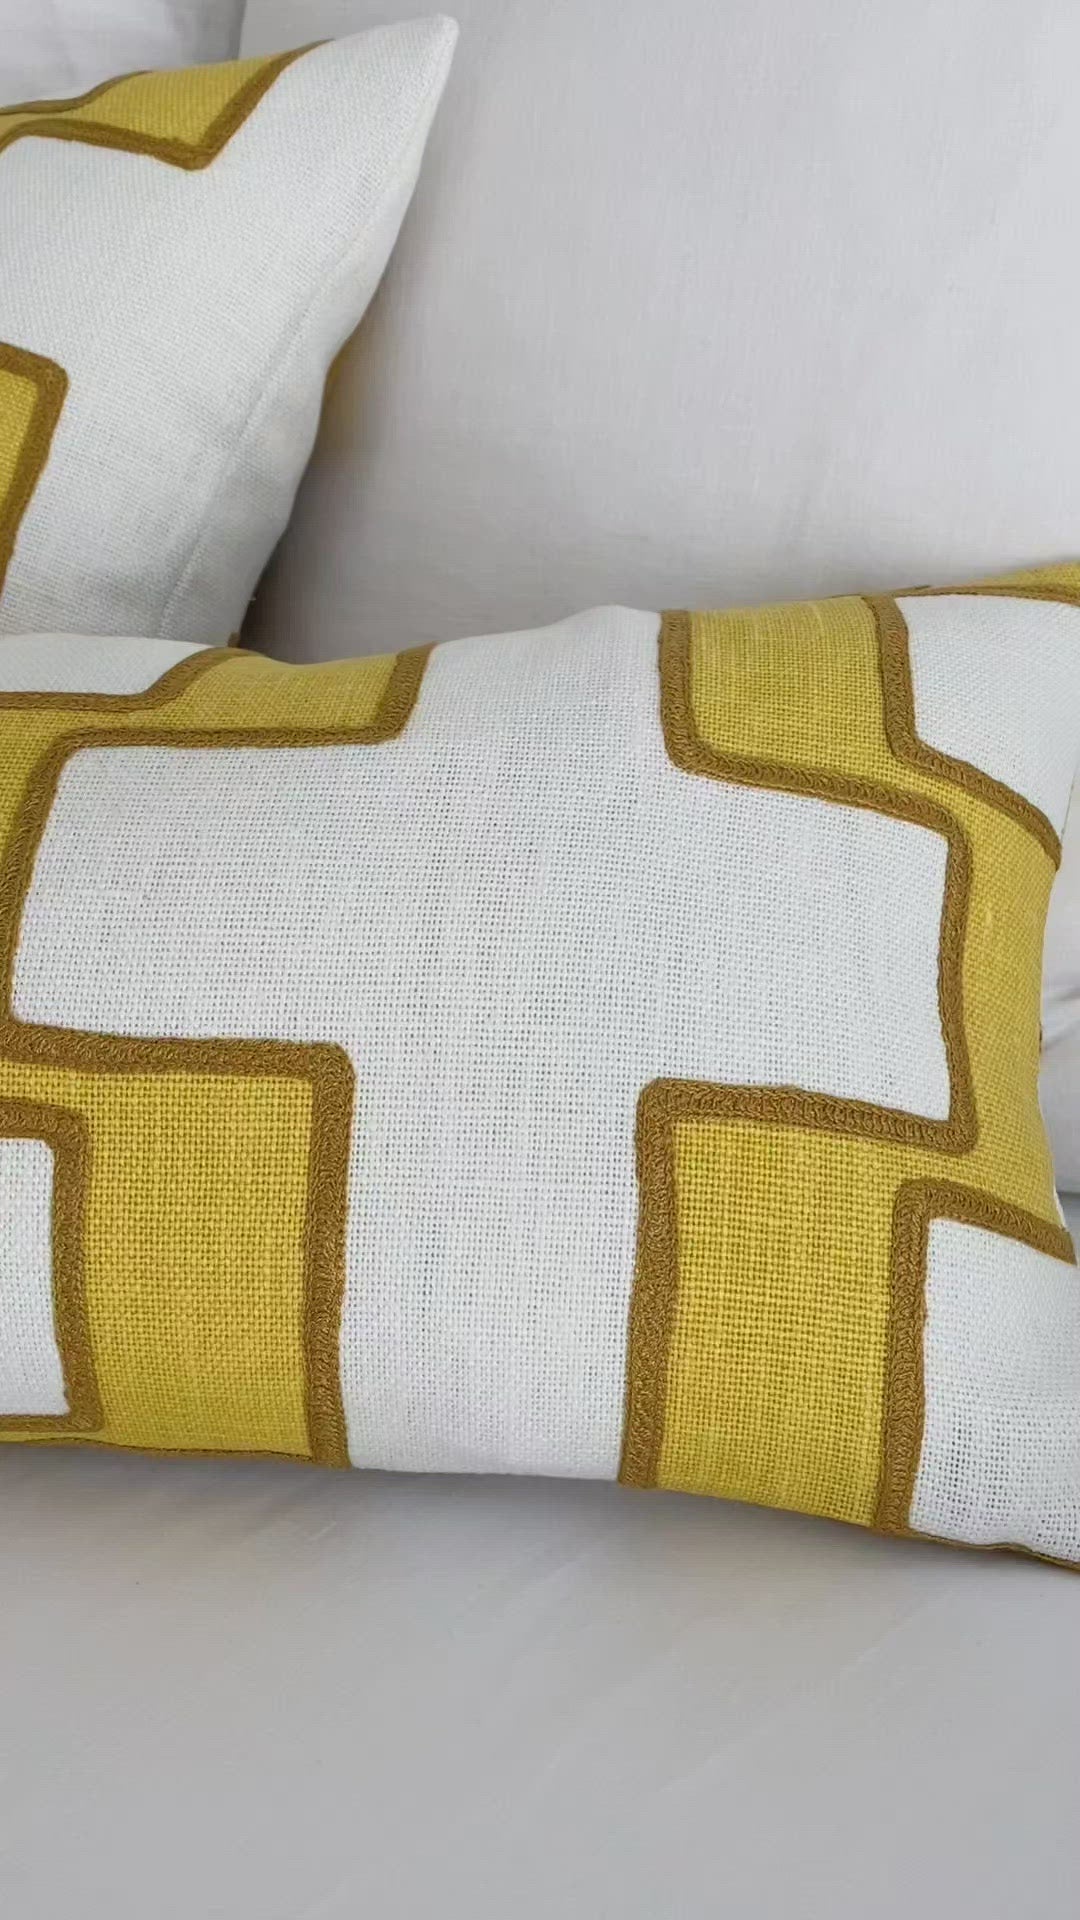 Schumacher Dixon Embroidered Print Yellow Luxury Designer Throw Pillow Cover Product Video